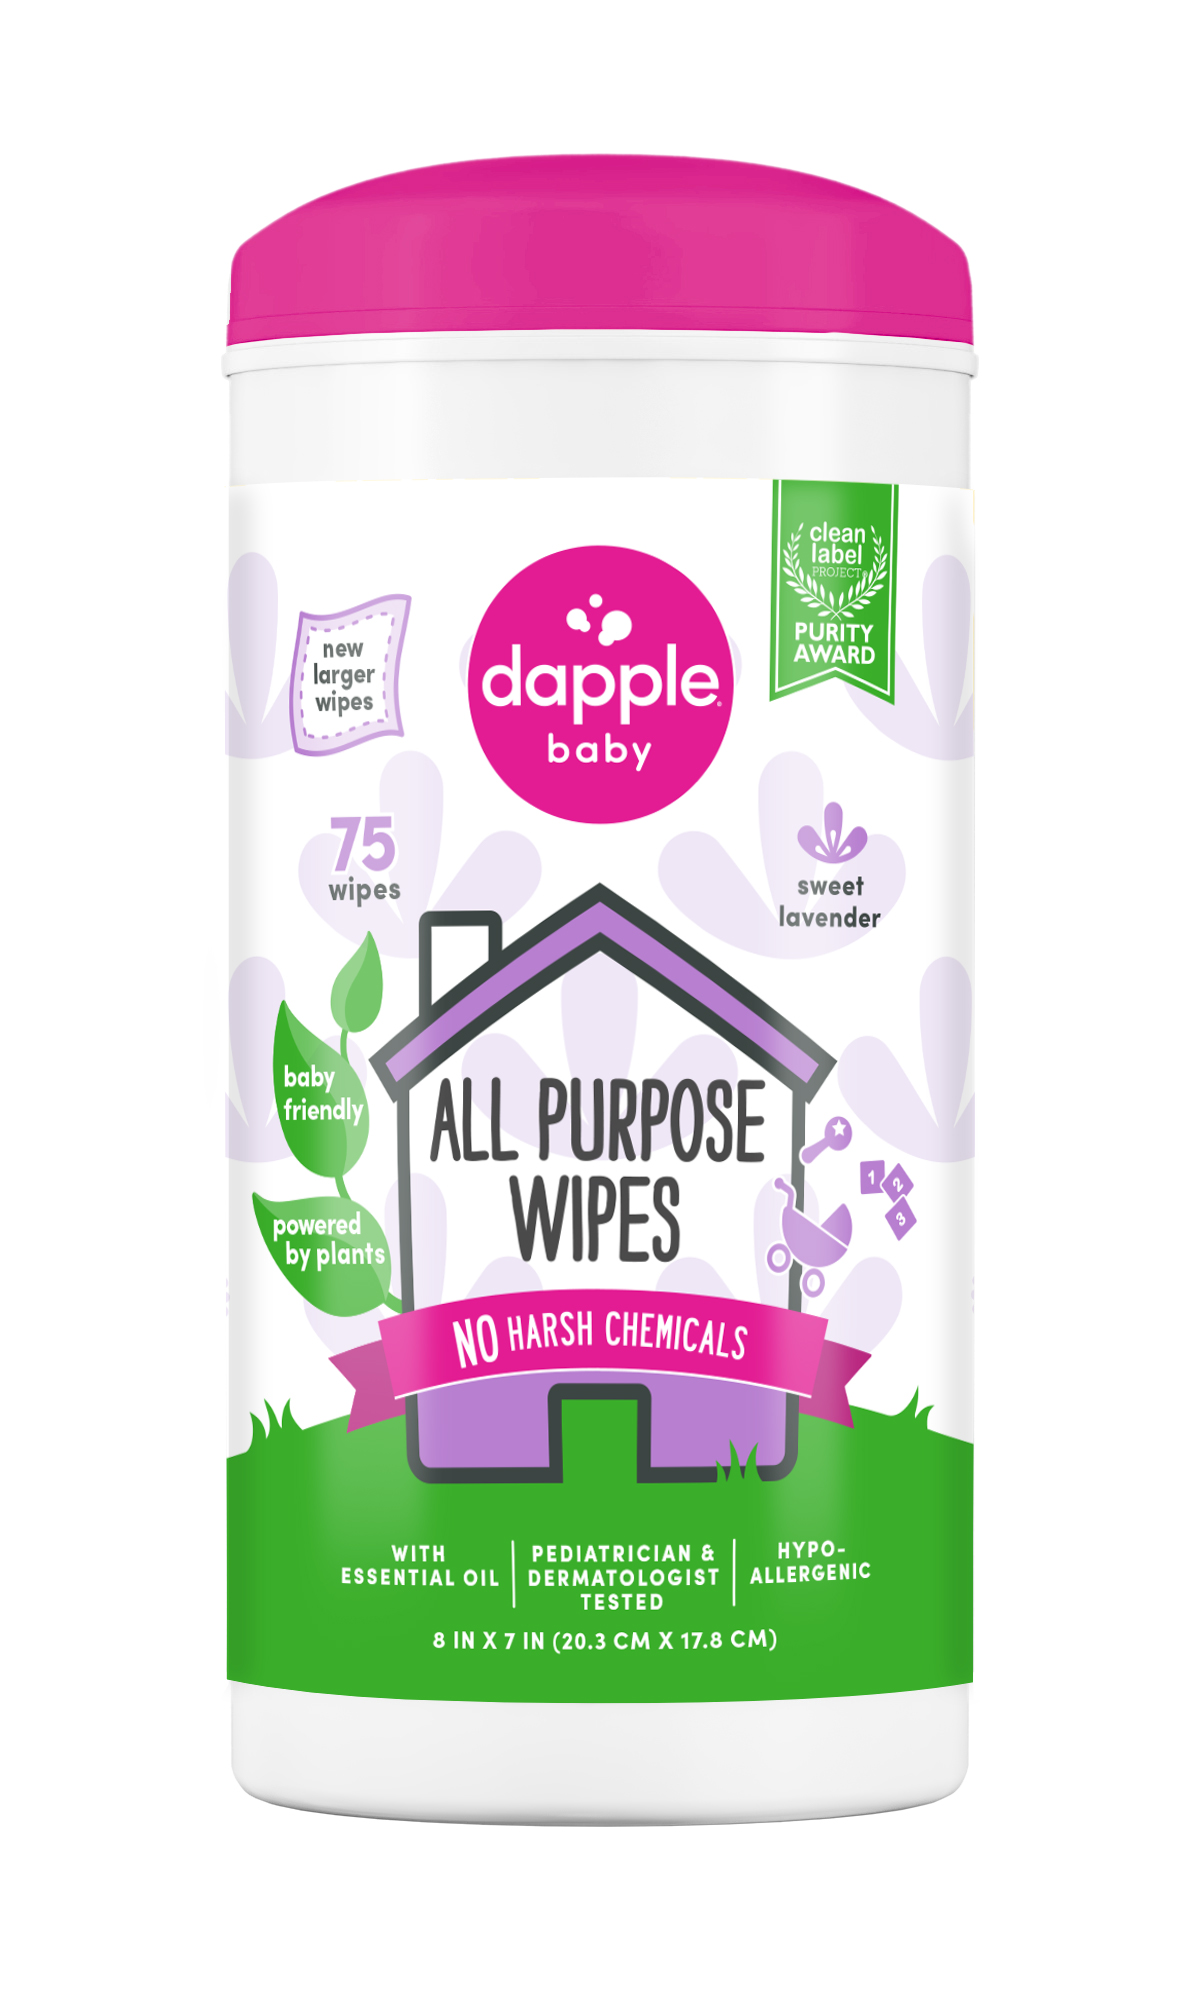 Dapple Baby - Dapple's breast pump wipes are specially designed to